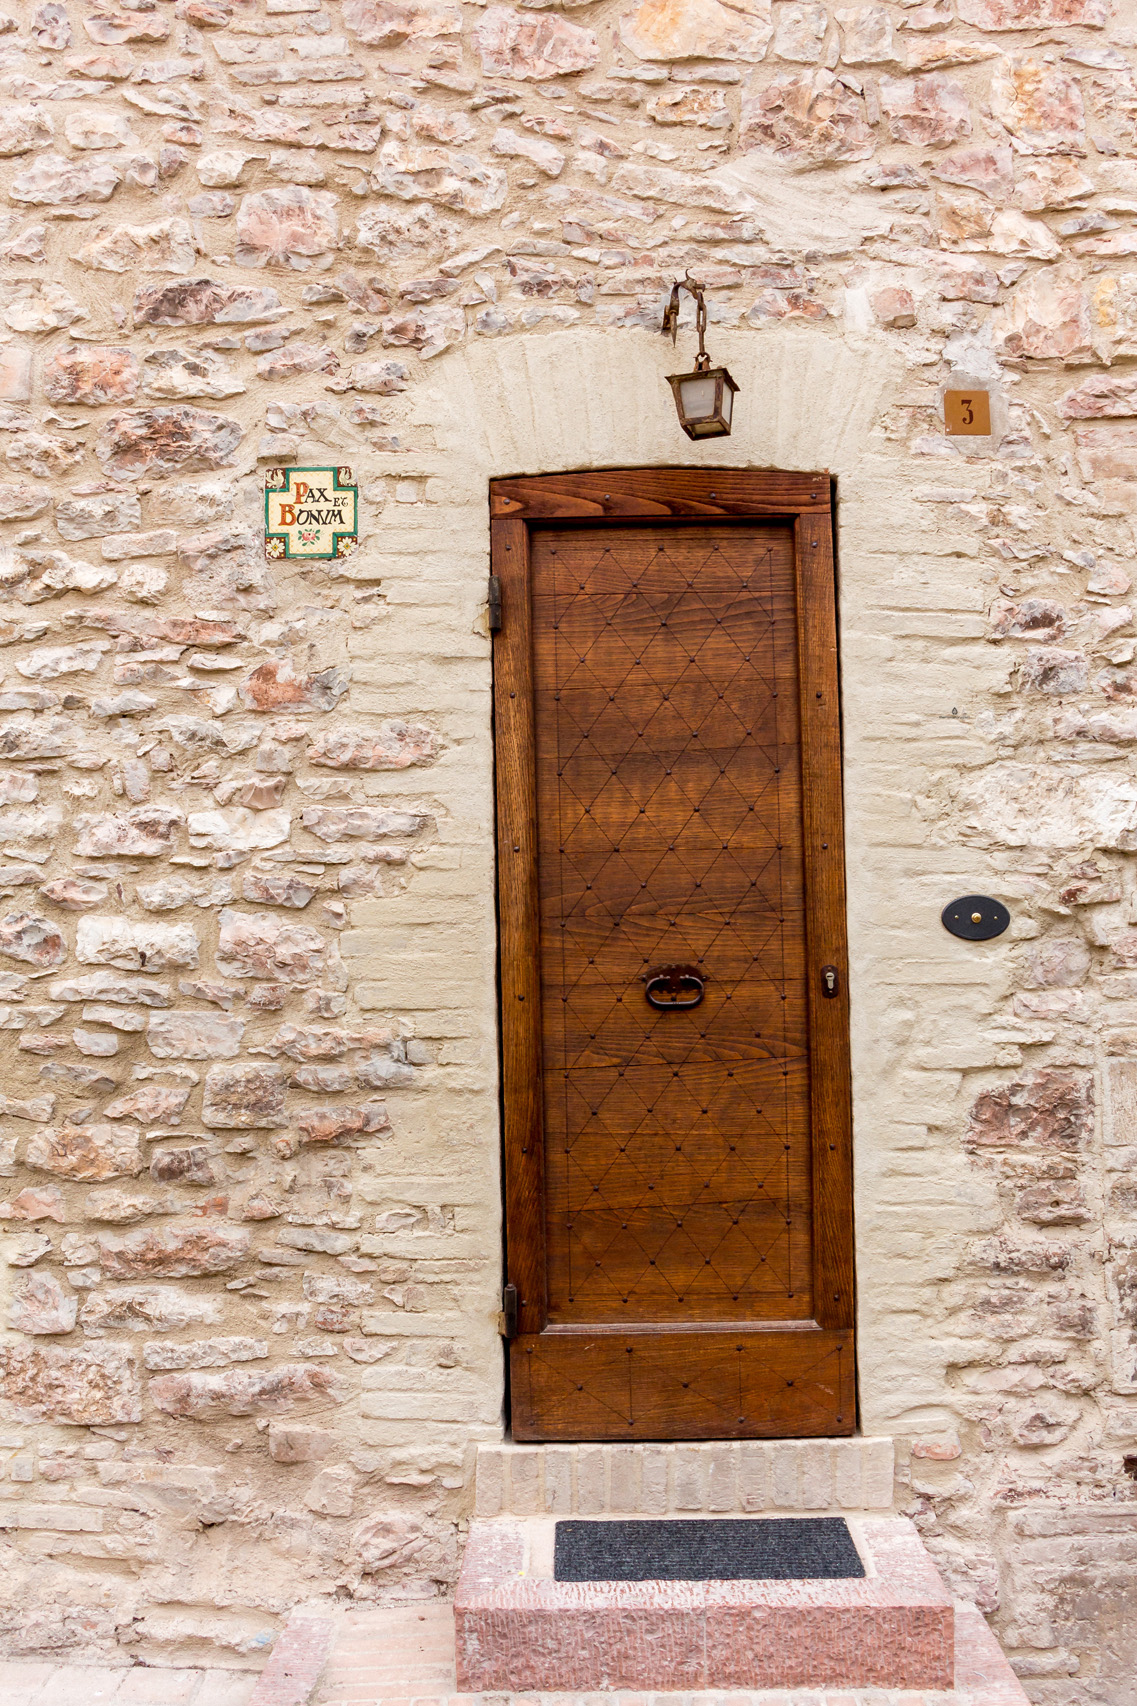 The doors of Assisi, Umbria